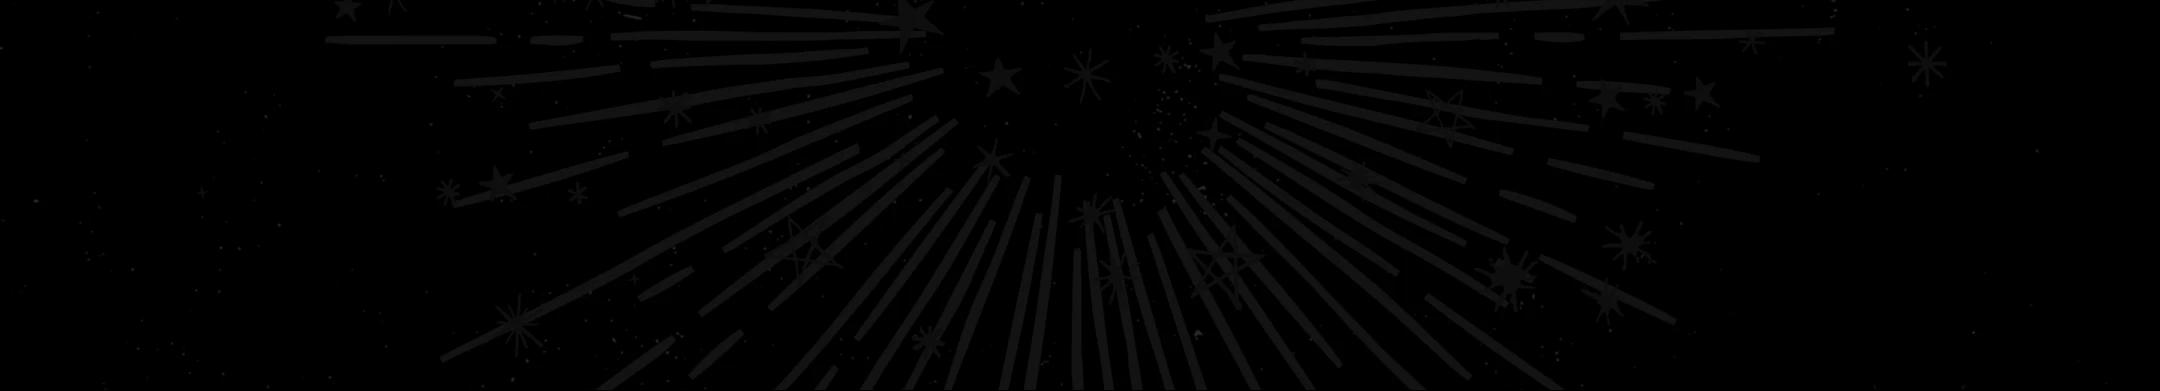 Stars and lines on a black background.